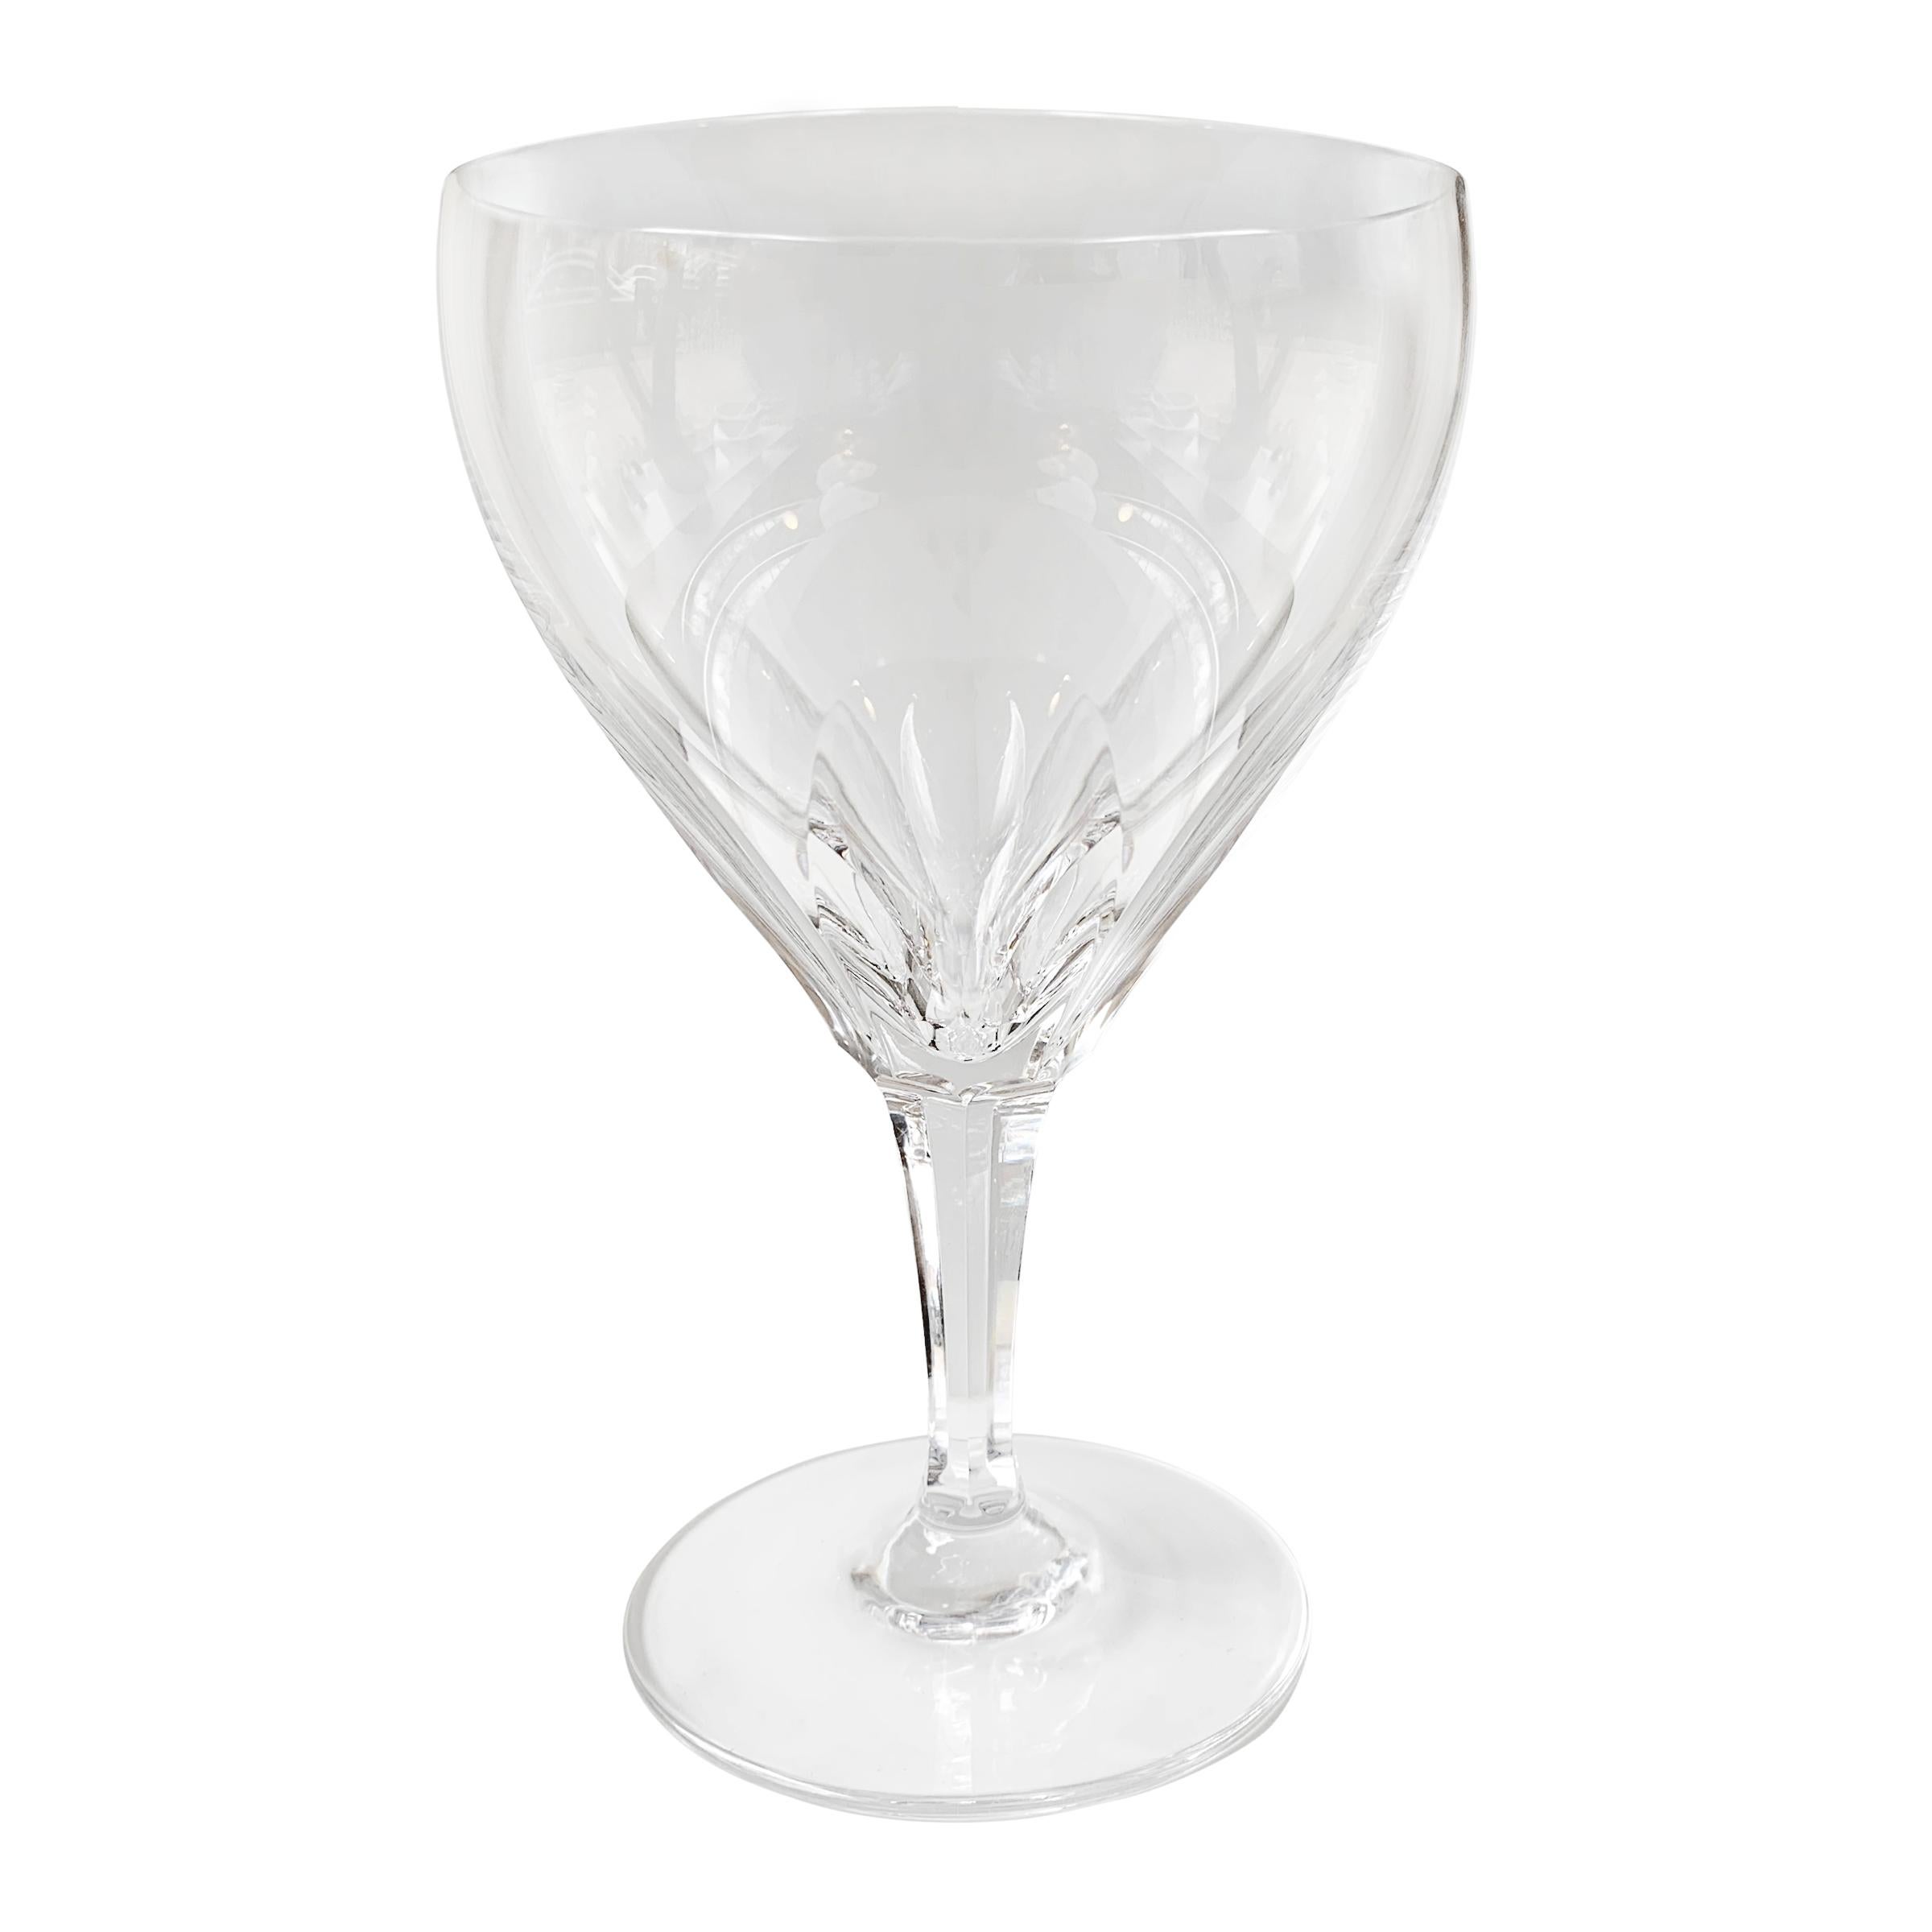 A set of eight cut crystal wine goblets manufactured by the German crystal company, Josair, in 1964. The sides feature six long panels cuts giving the appearance of a flower when looking down into the glass. Panel cutting is the most difficult type